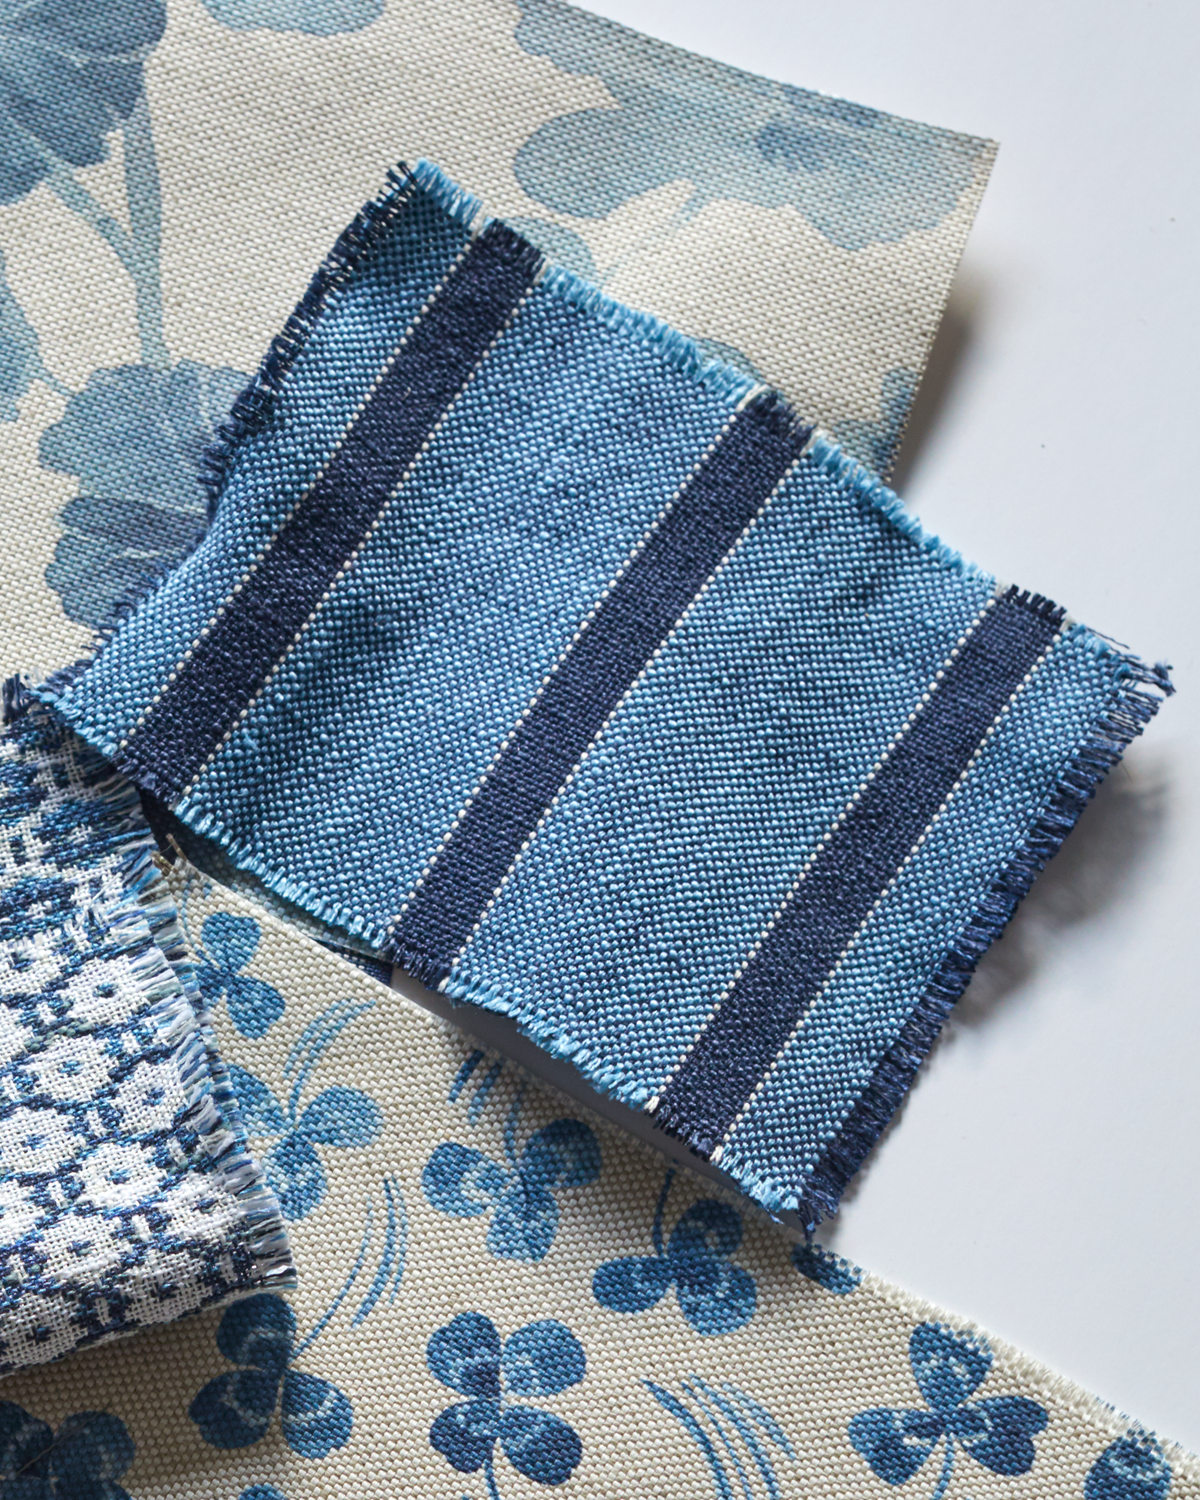 Clovers Fabric in Blue/Oatmeal